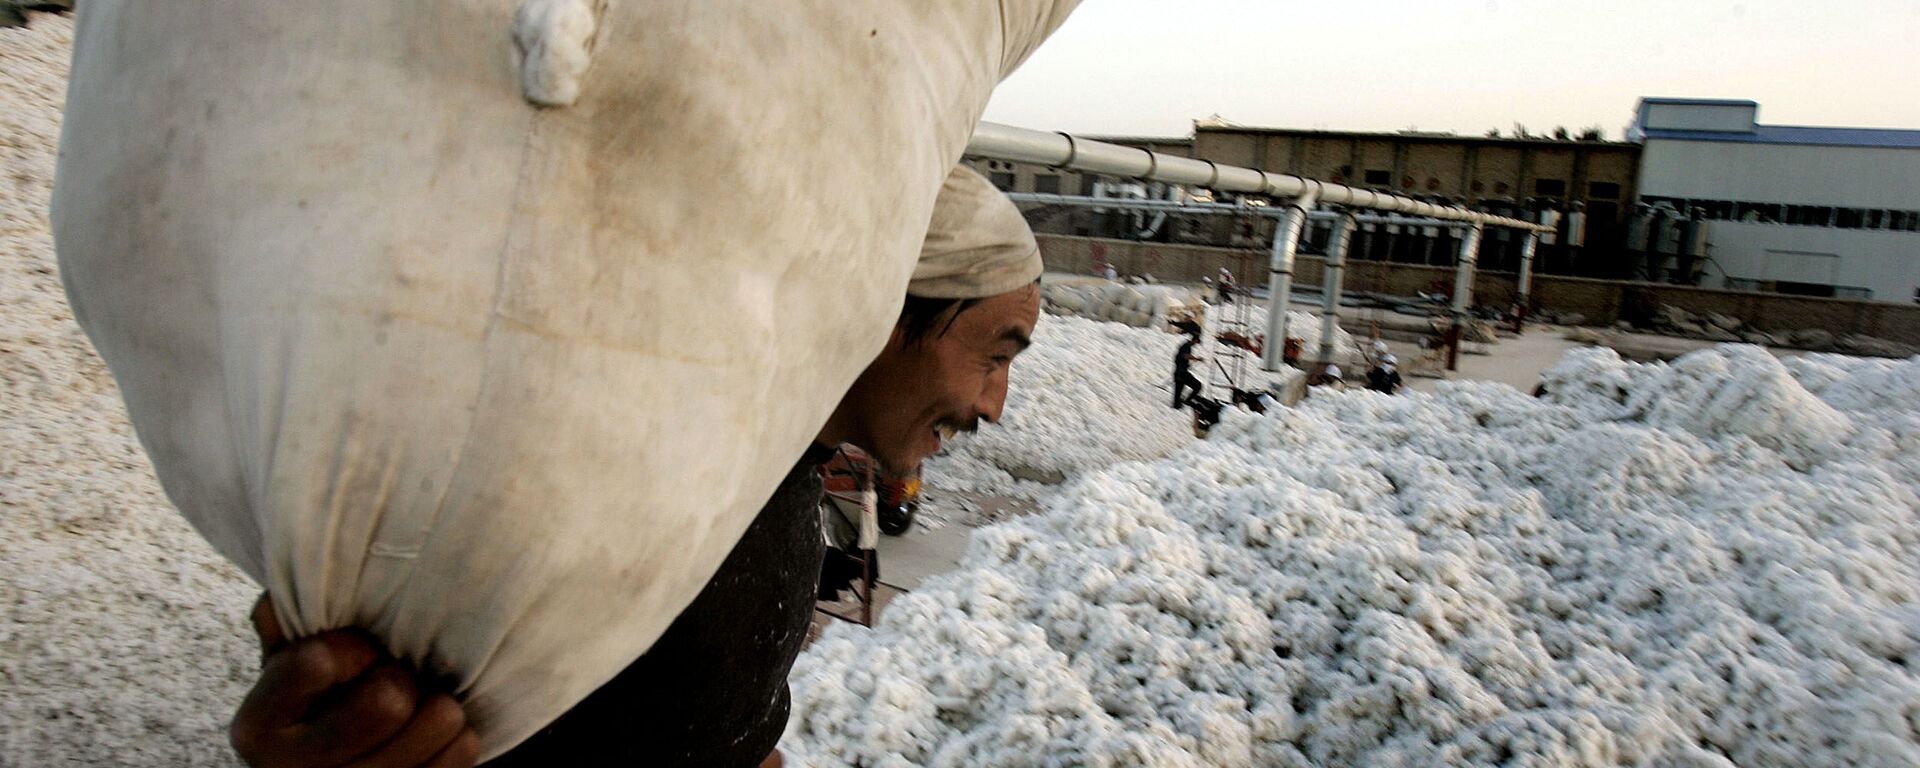 A worker carries a sack containing raw cotton in the city of Korla  in northwest China's Xinjiang Uygur Autonomous Region on Tuesday, Oct. 10, 2006 - Sputnik International, 1920, 17.02.2021